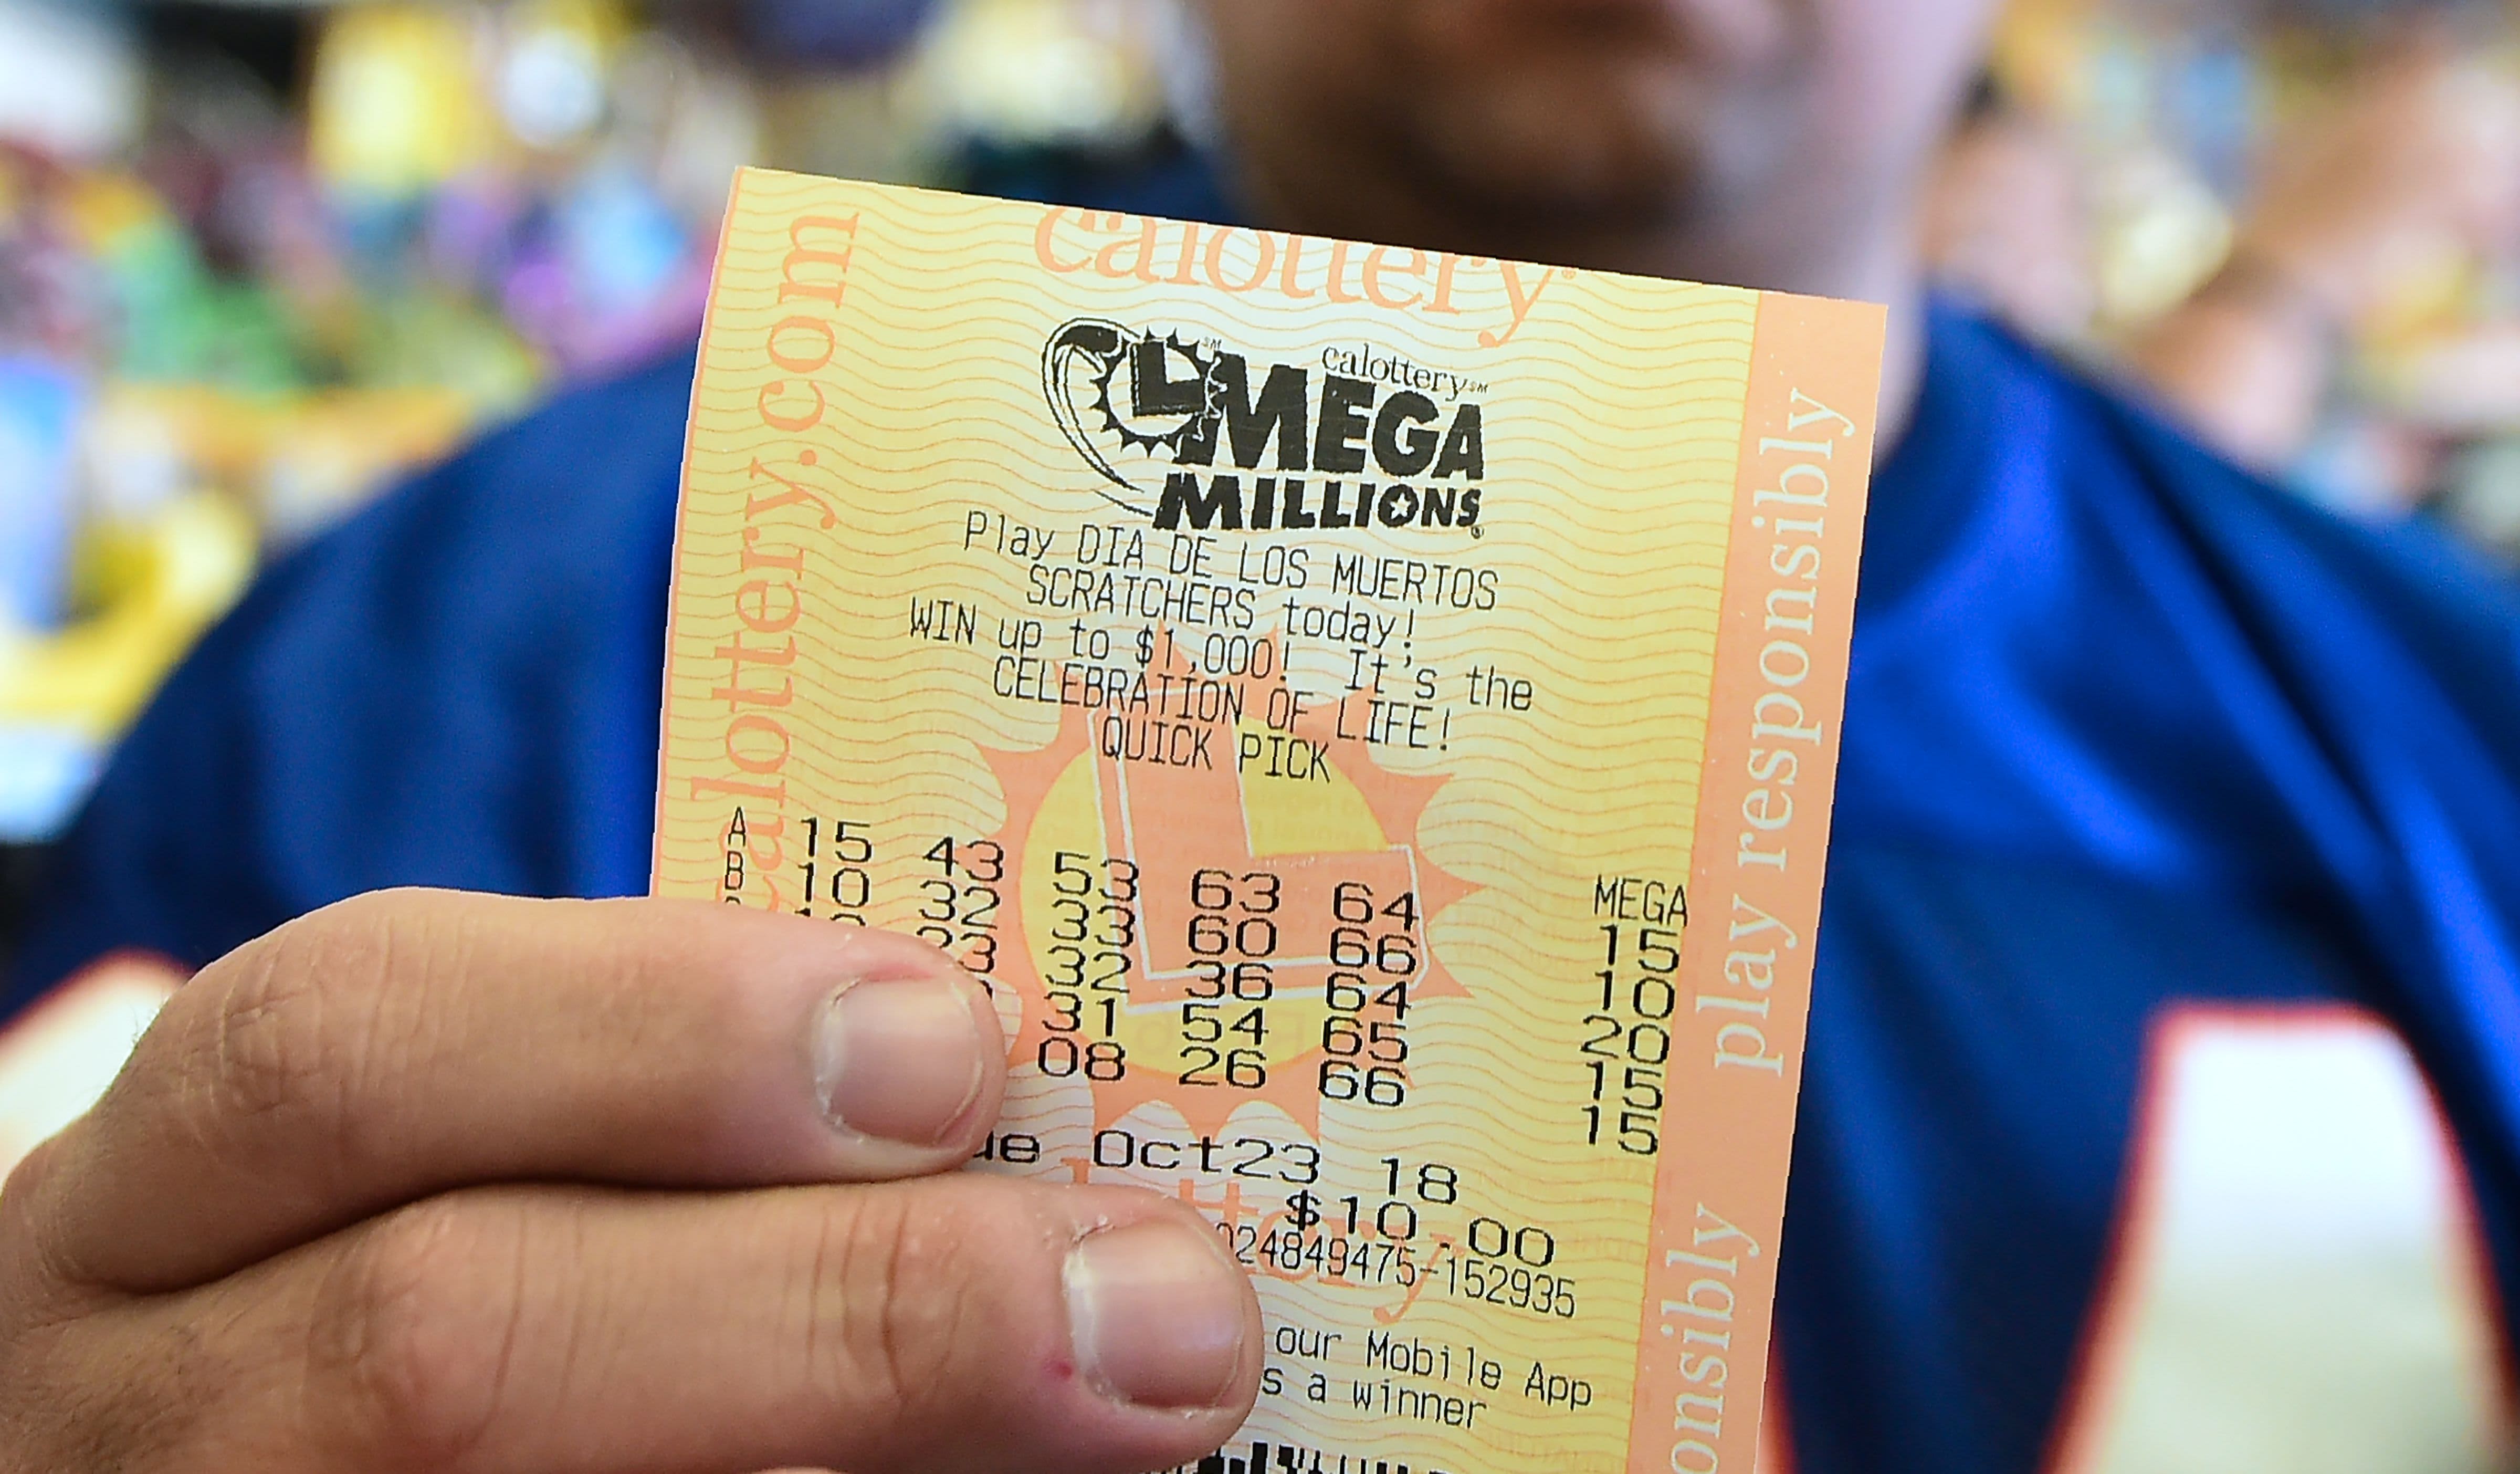 No one claimed a $2 million Powerball ticket in Texas